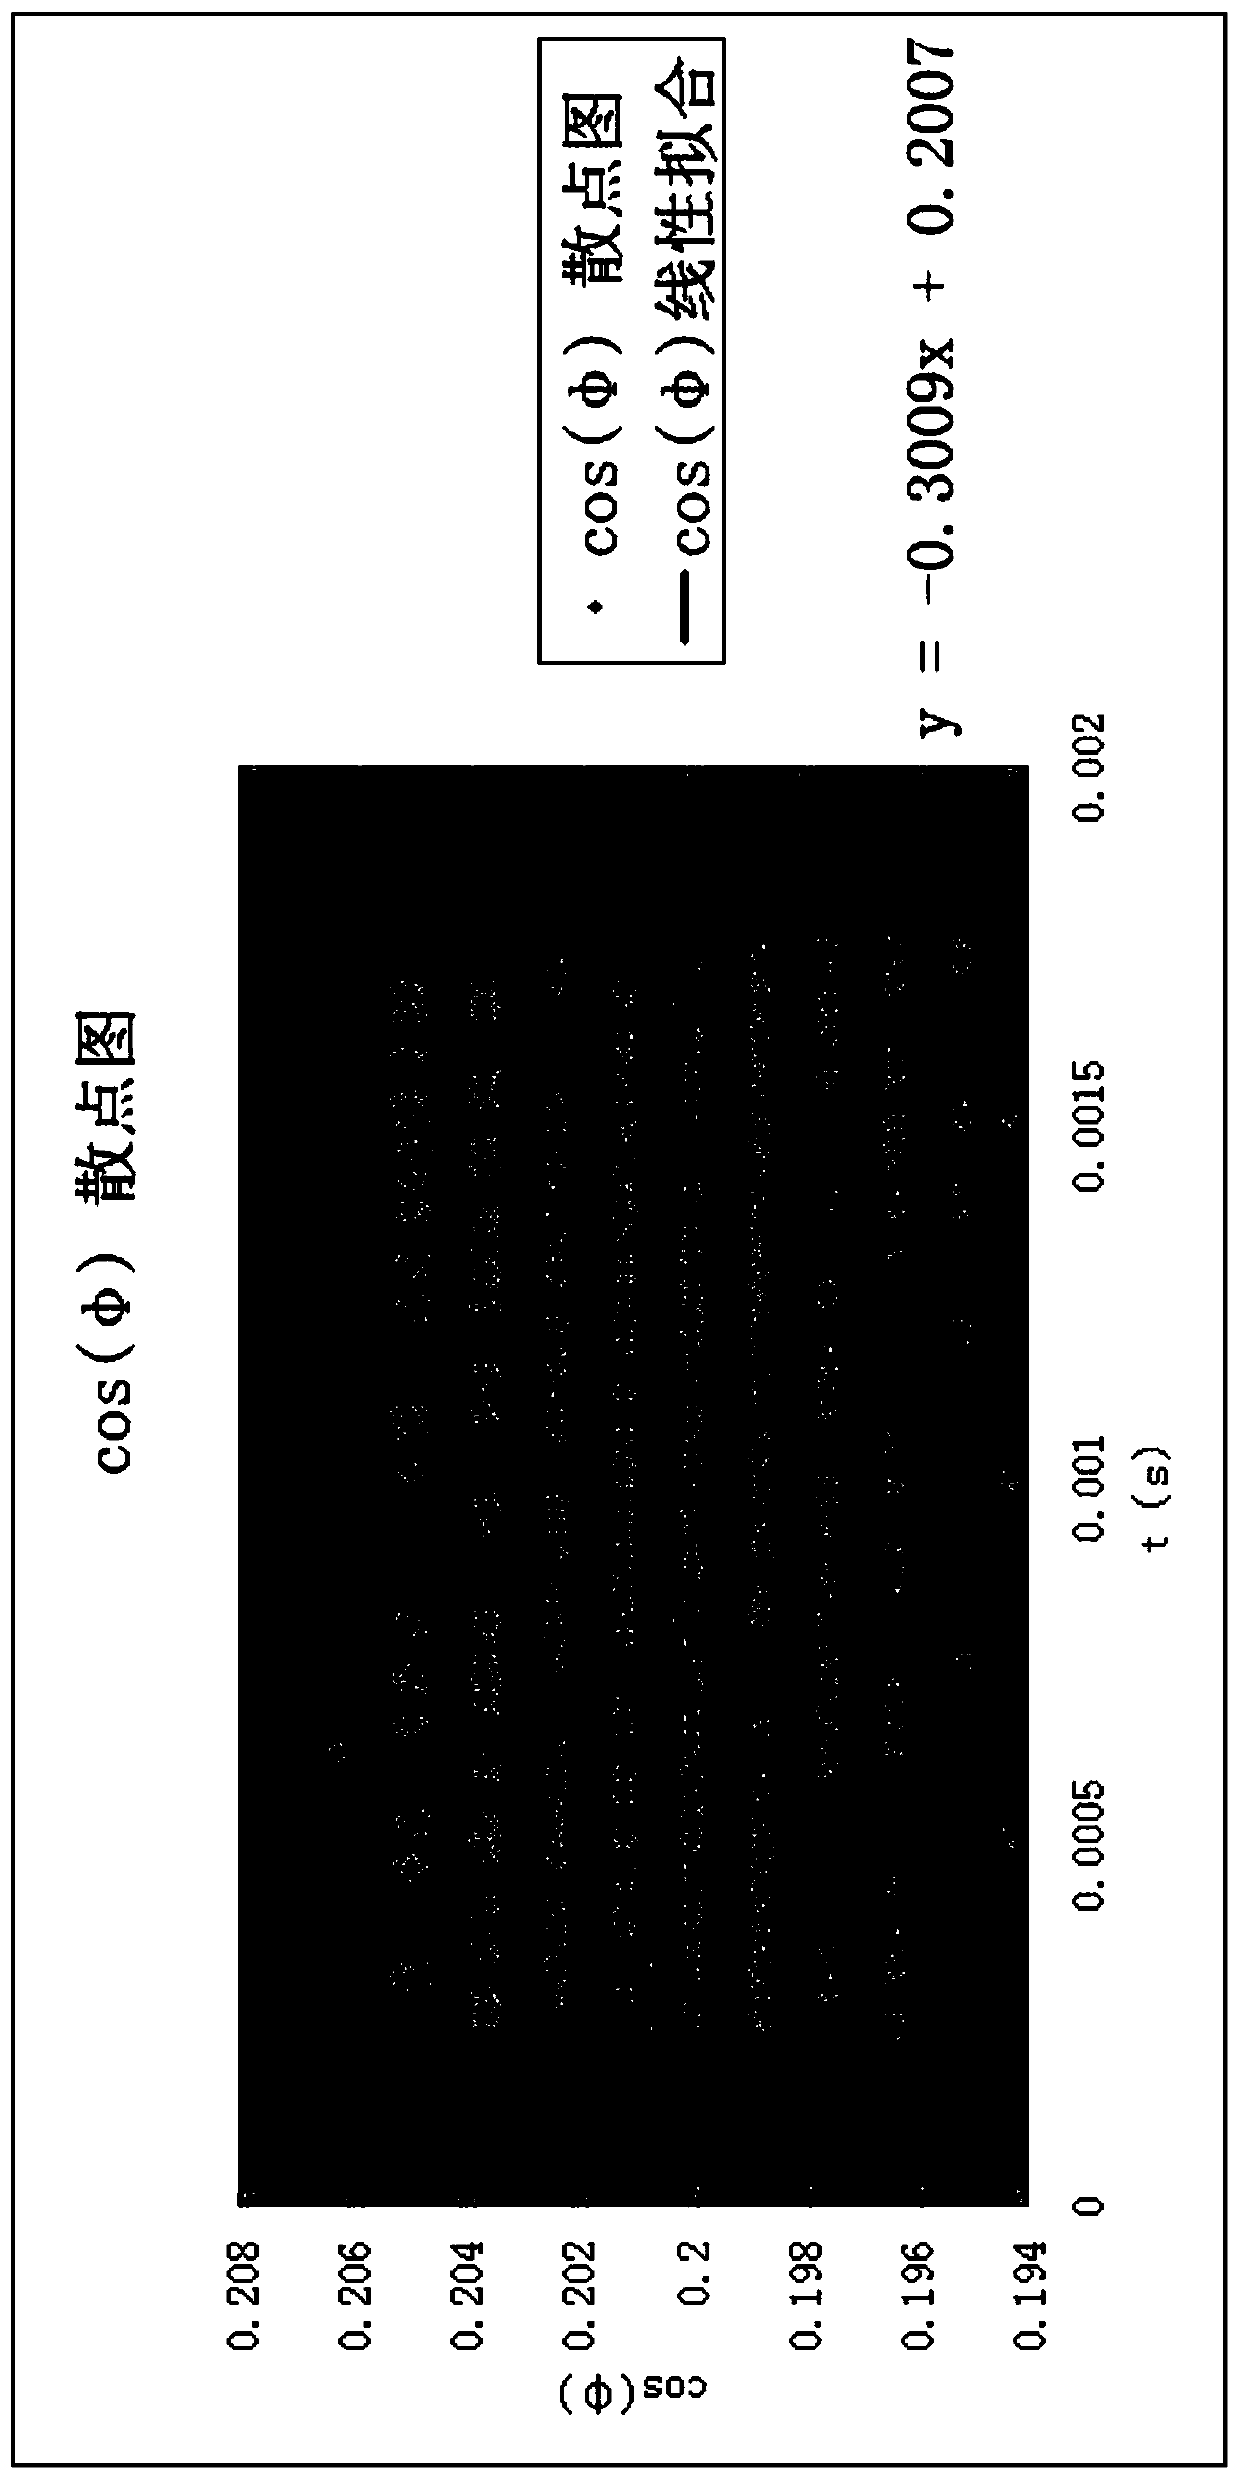 Equal-period fitting measurement method of power factor in short-circuit test of low-voltage apparatus